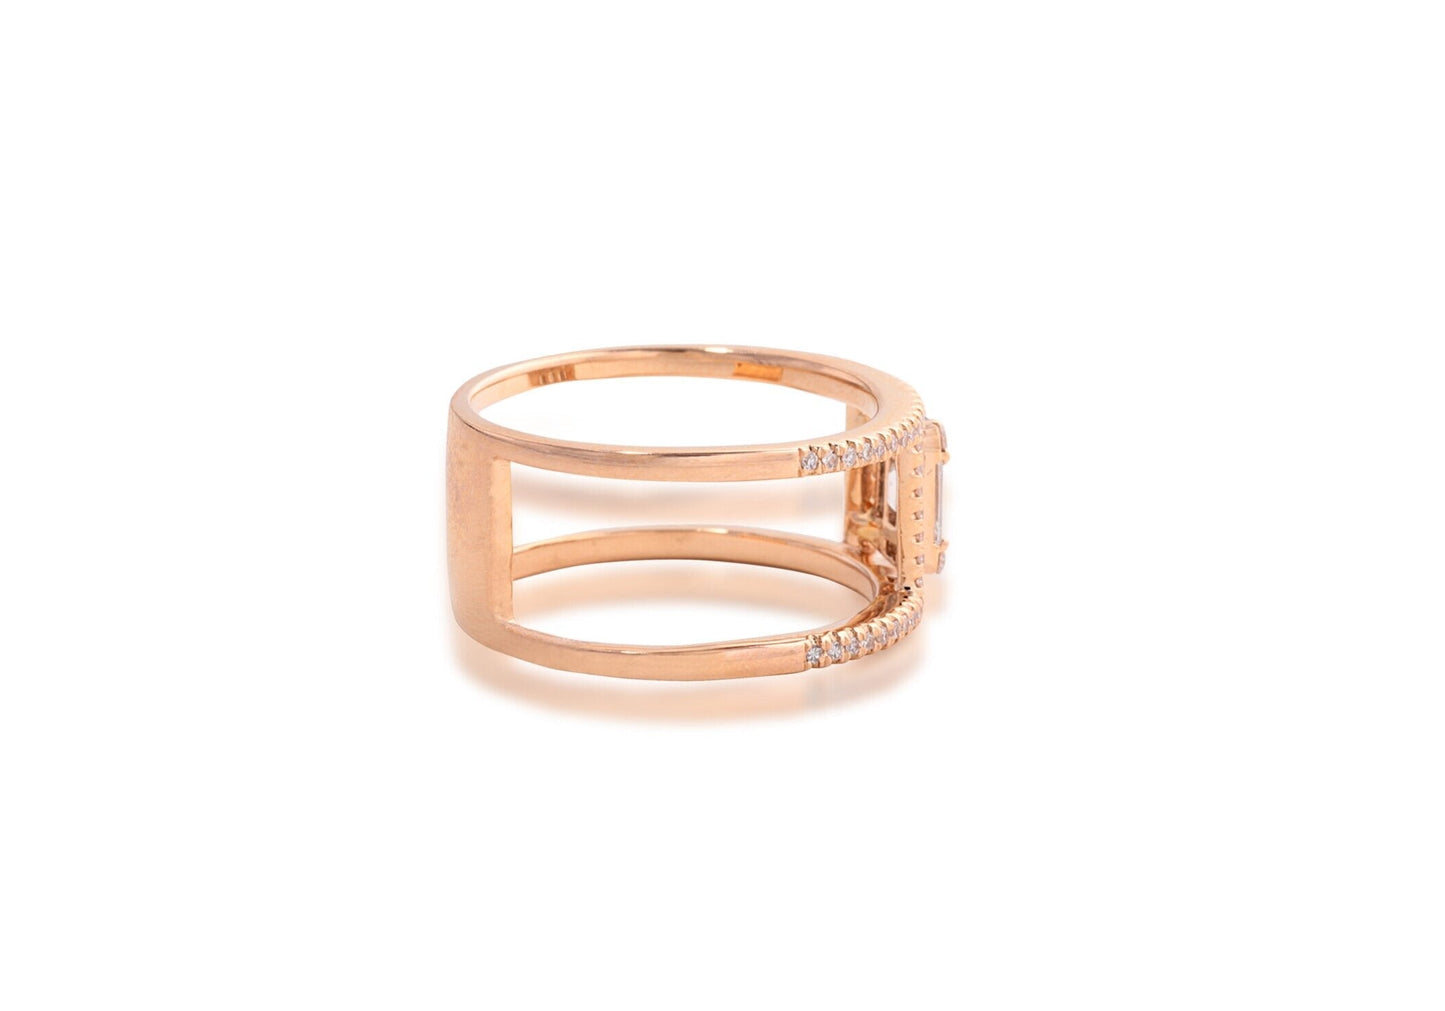 14K Rose Gold Diamond Pave and Baguette Ring